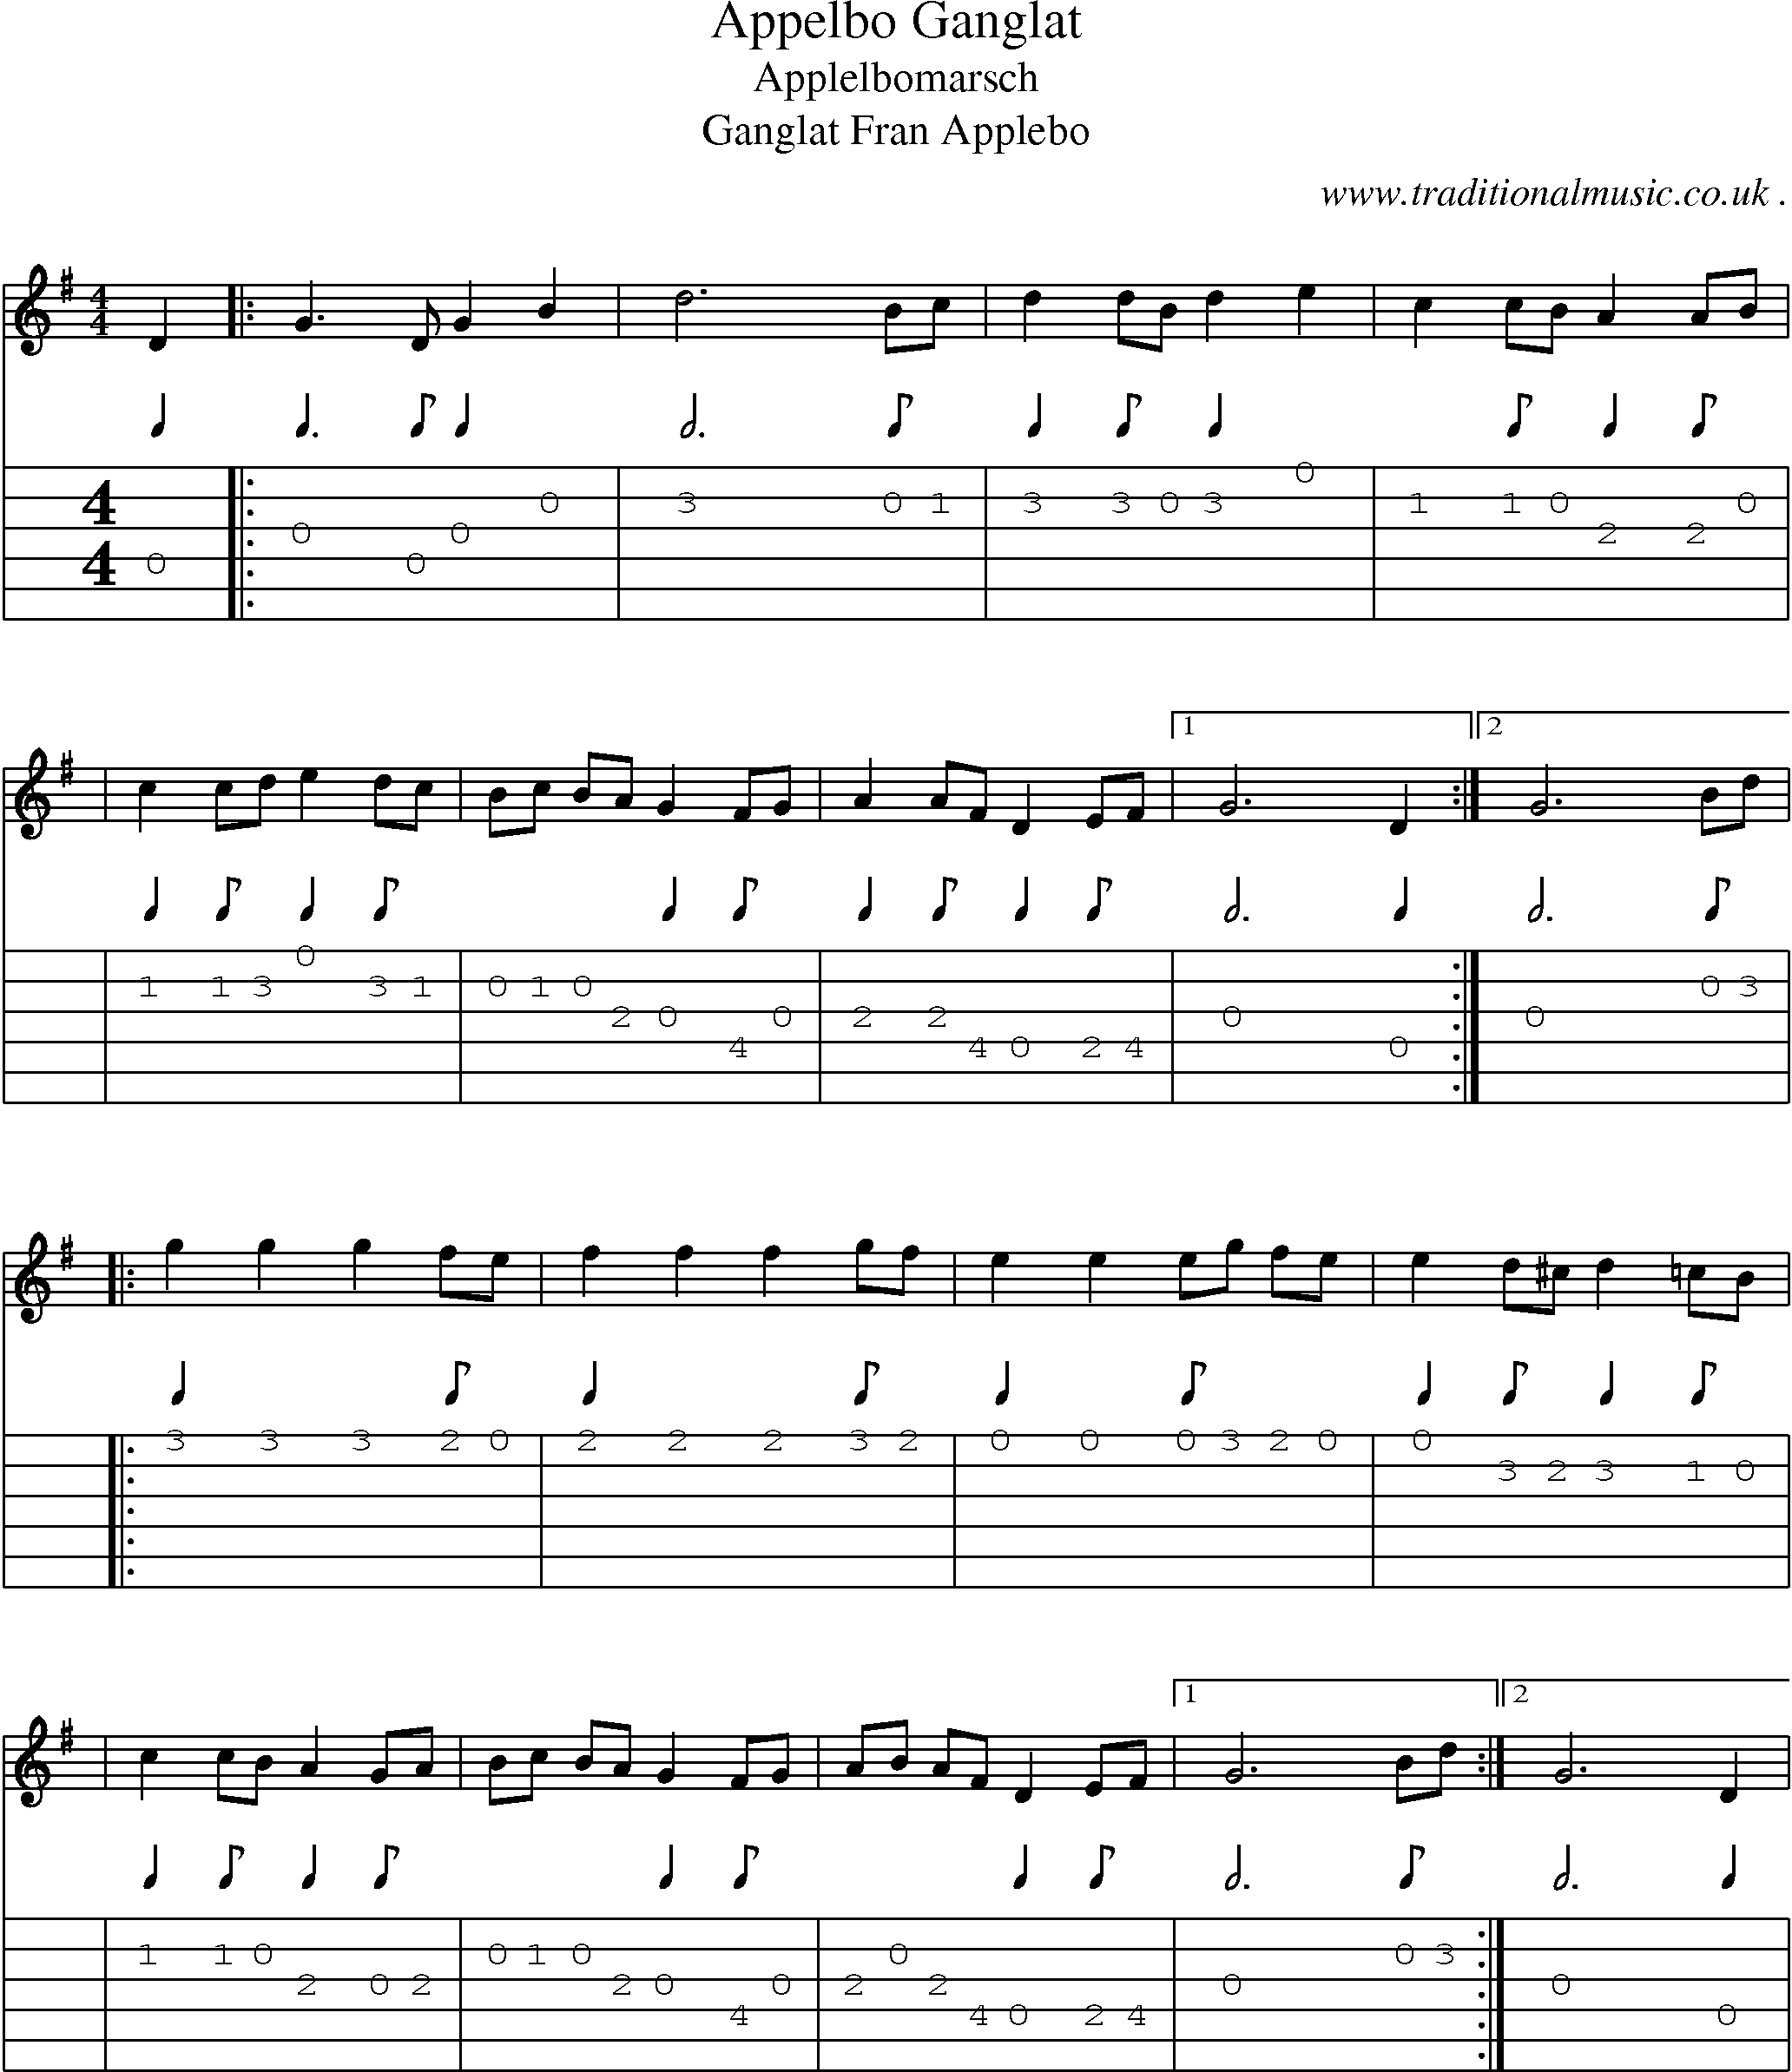 Sheet-Music and Guitar Tabs for Appelbo Ganglat